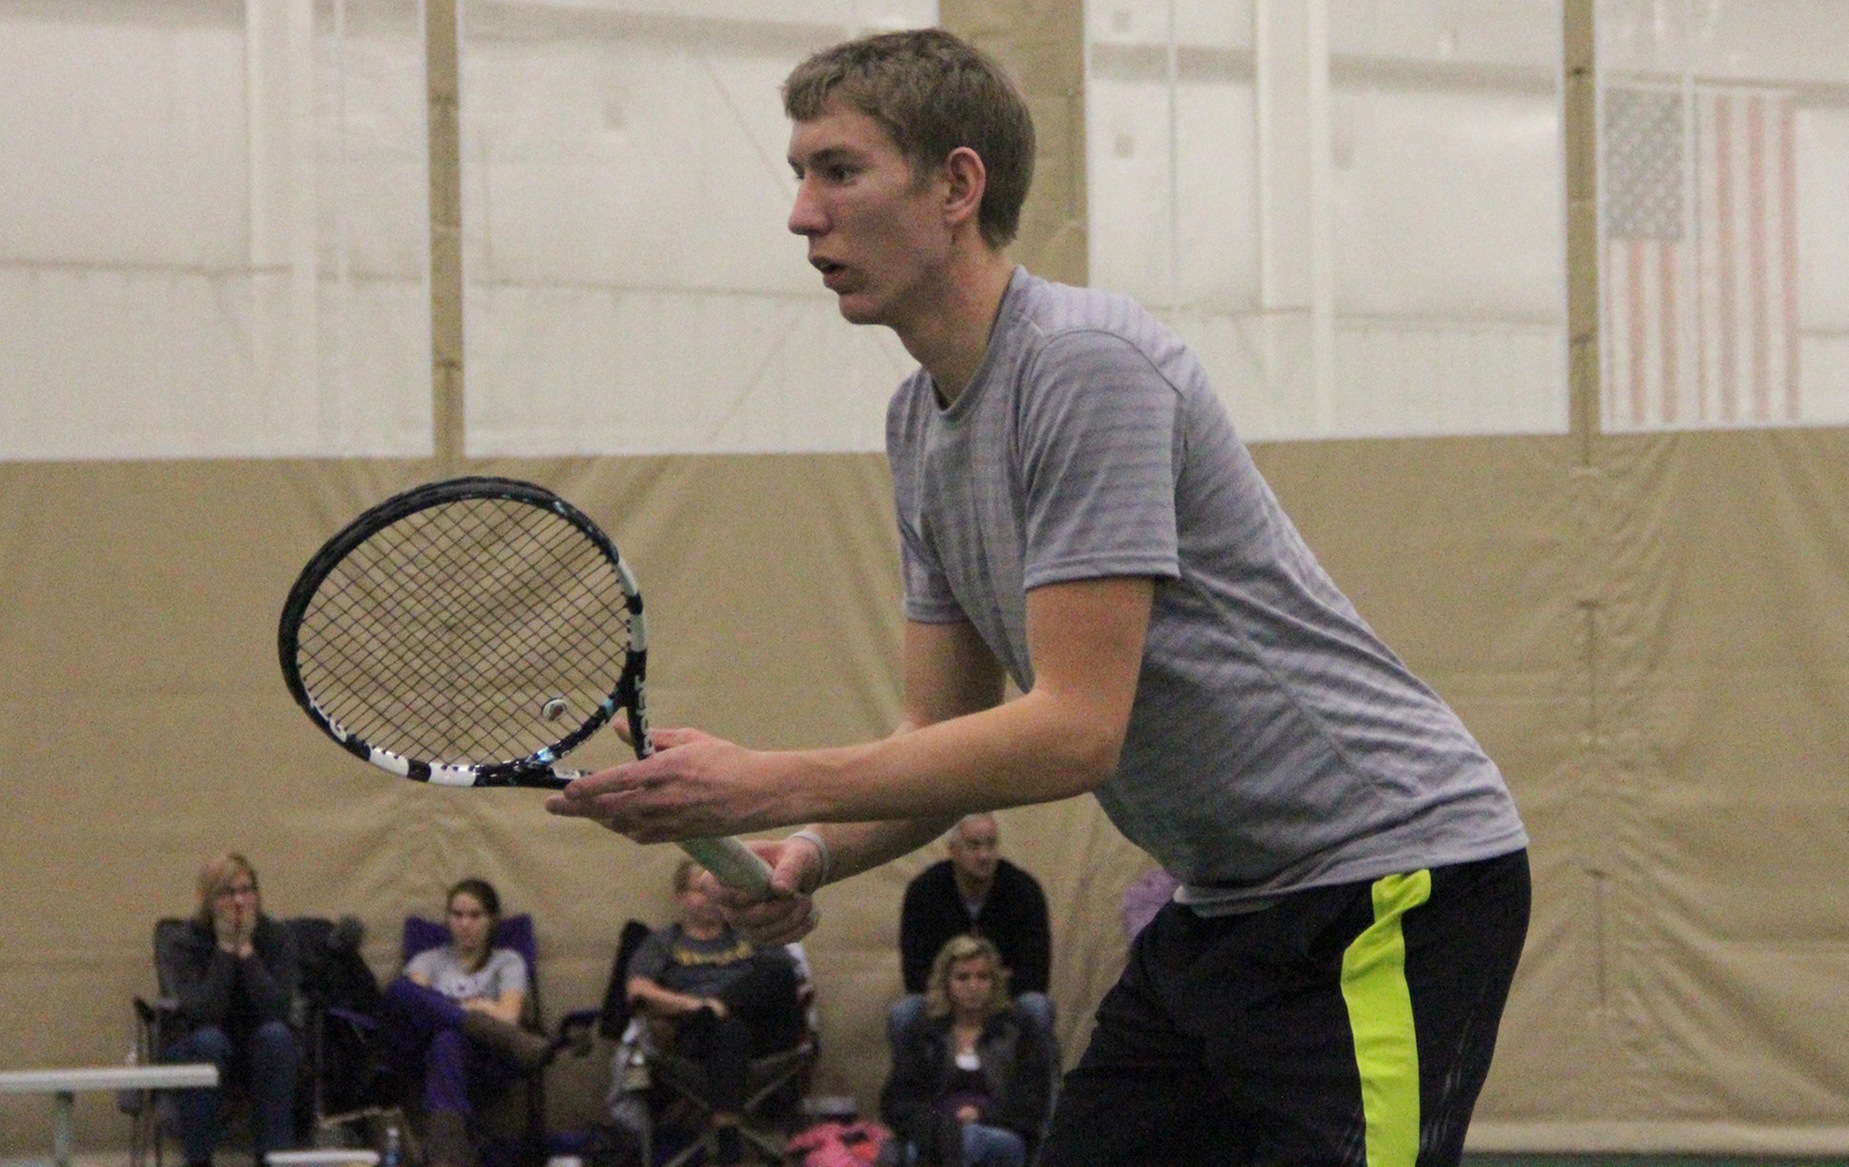 Defiance sweeps Manchester for HCAC win